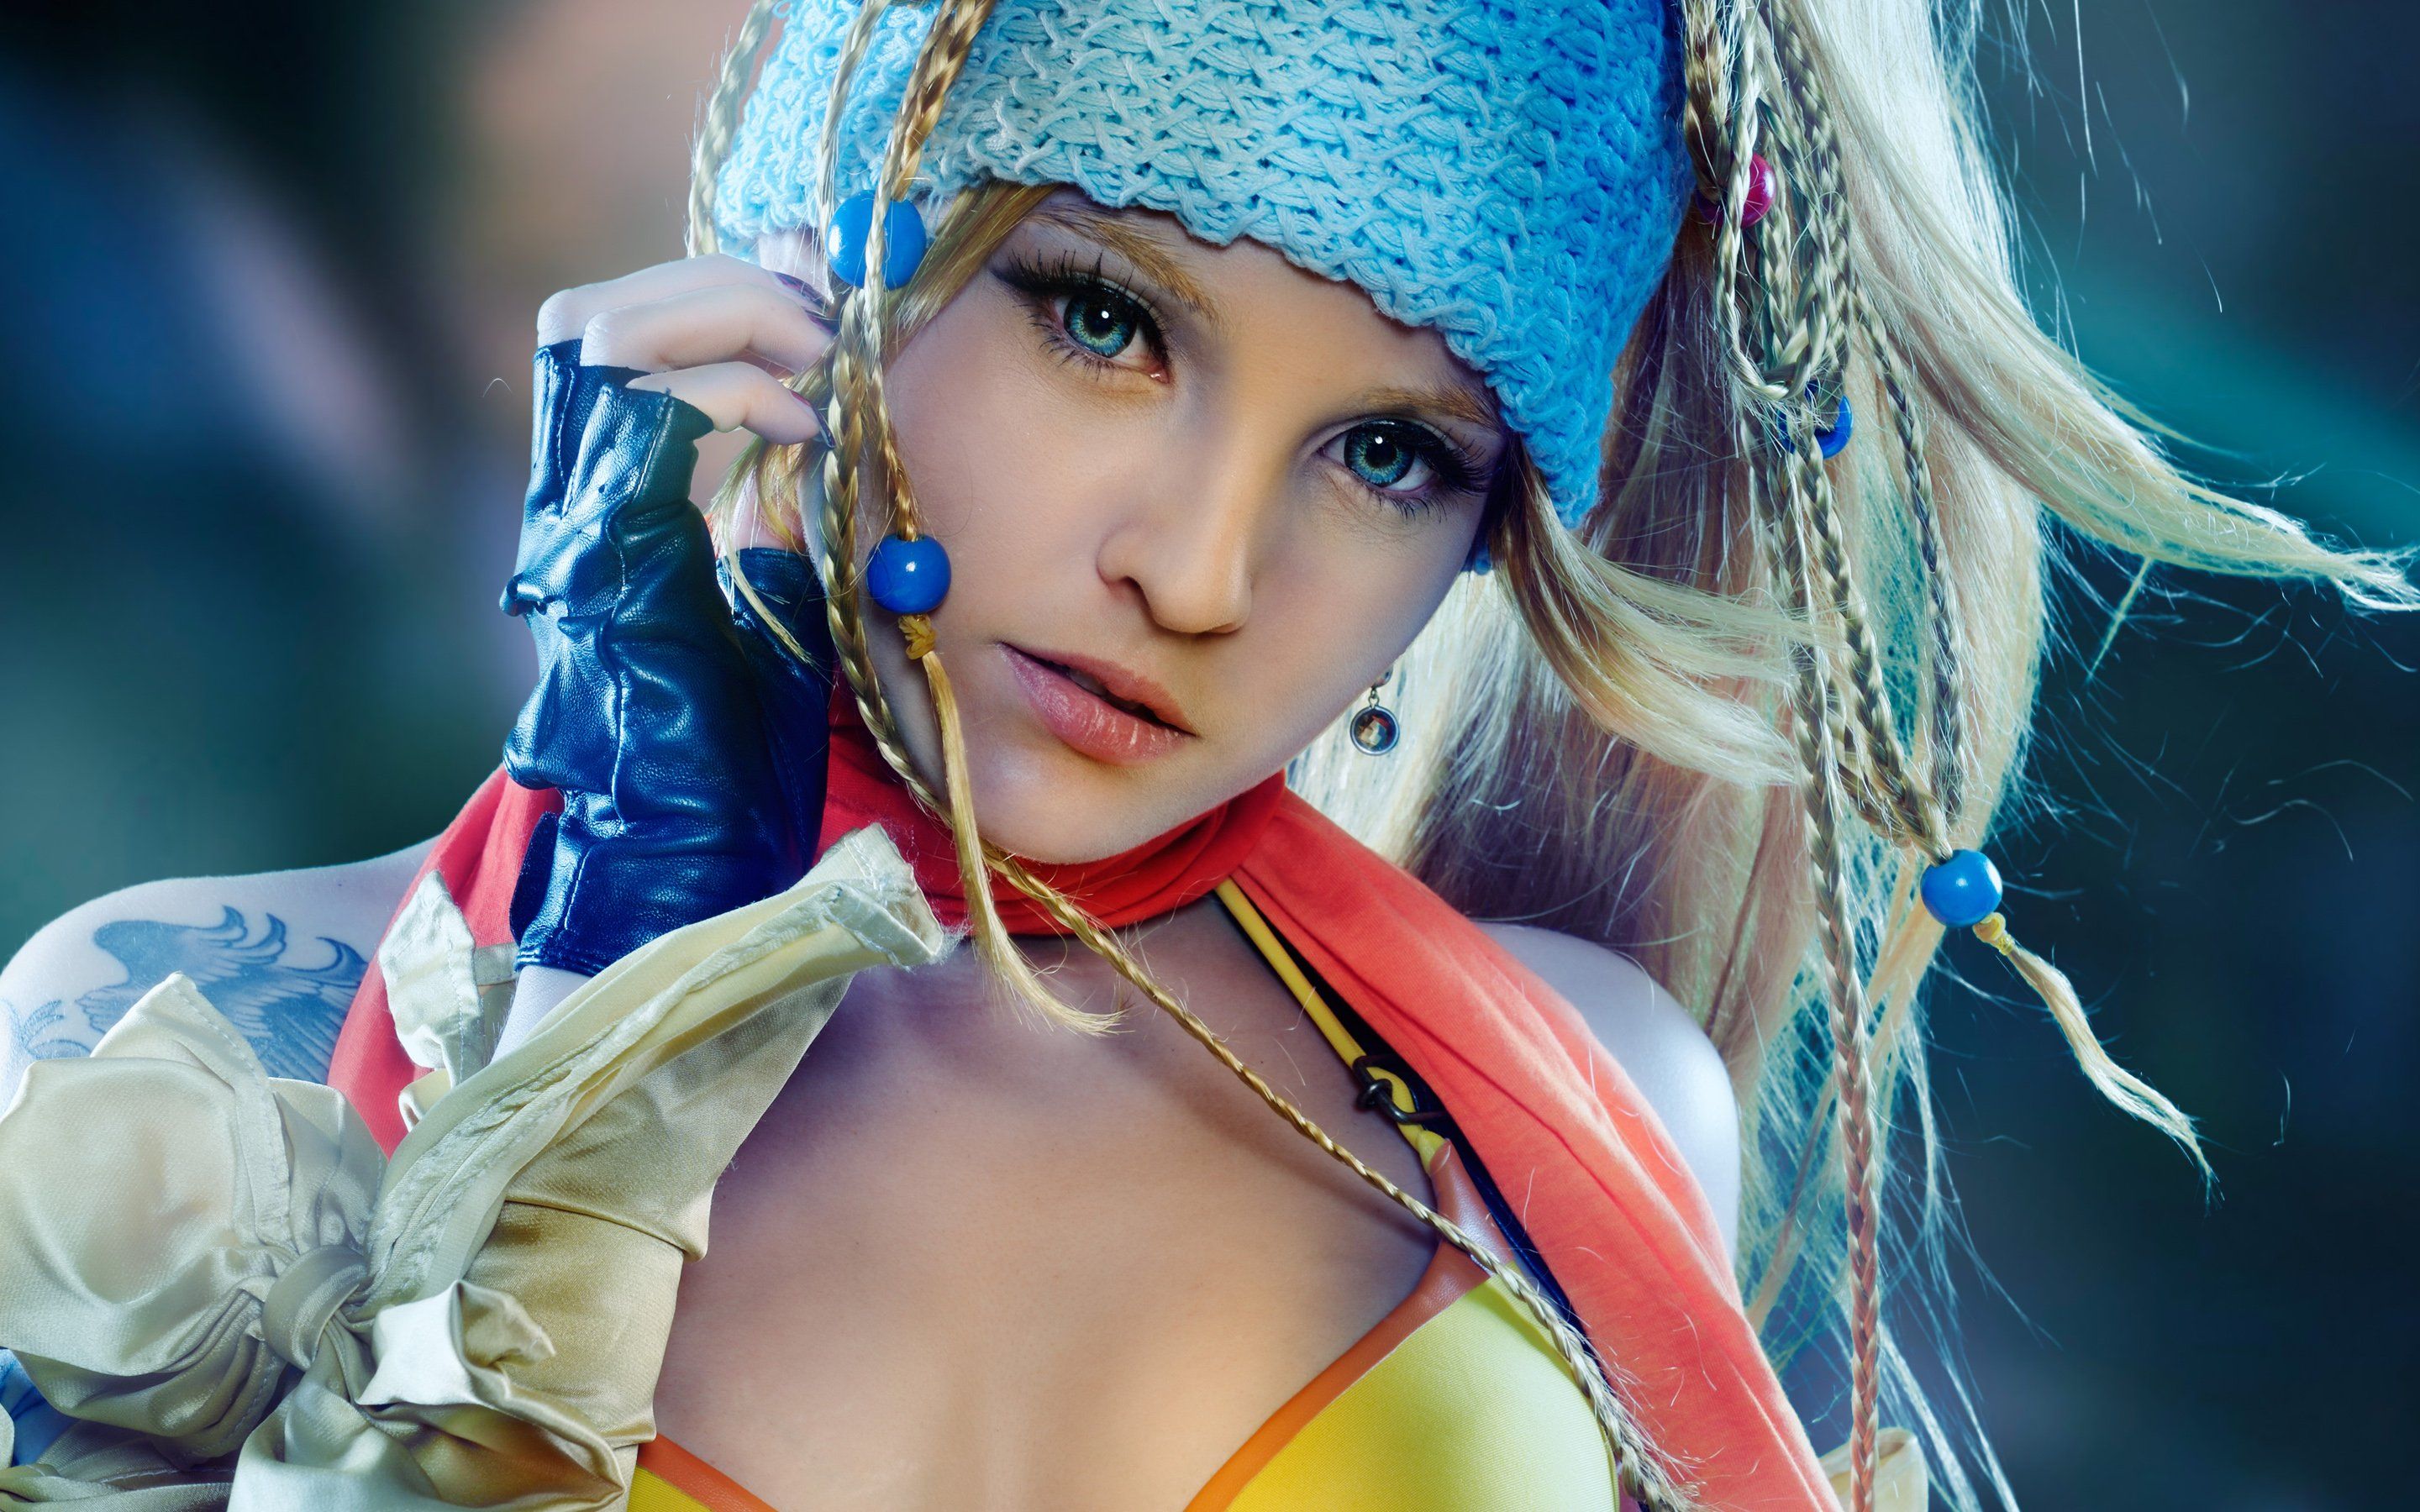 Rikku 4K wallpaper for your desktop or mobile screen free and easy to download